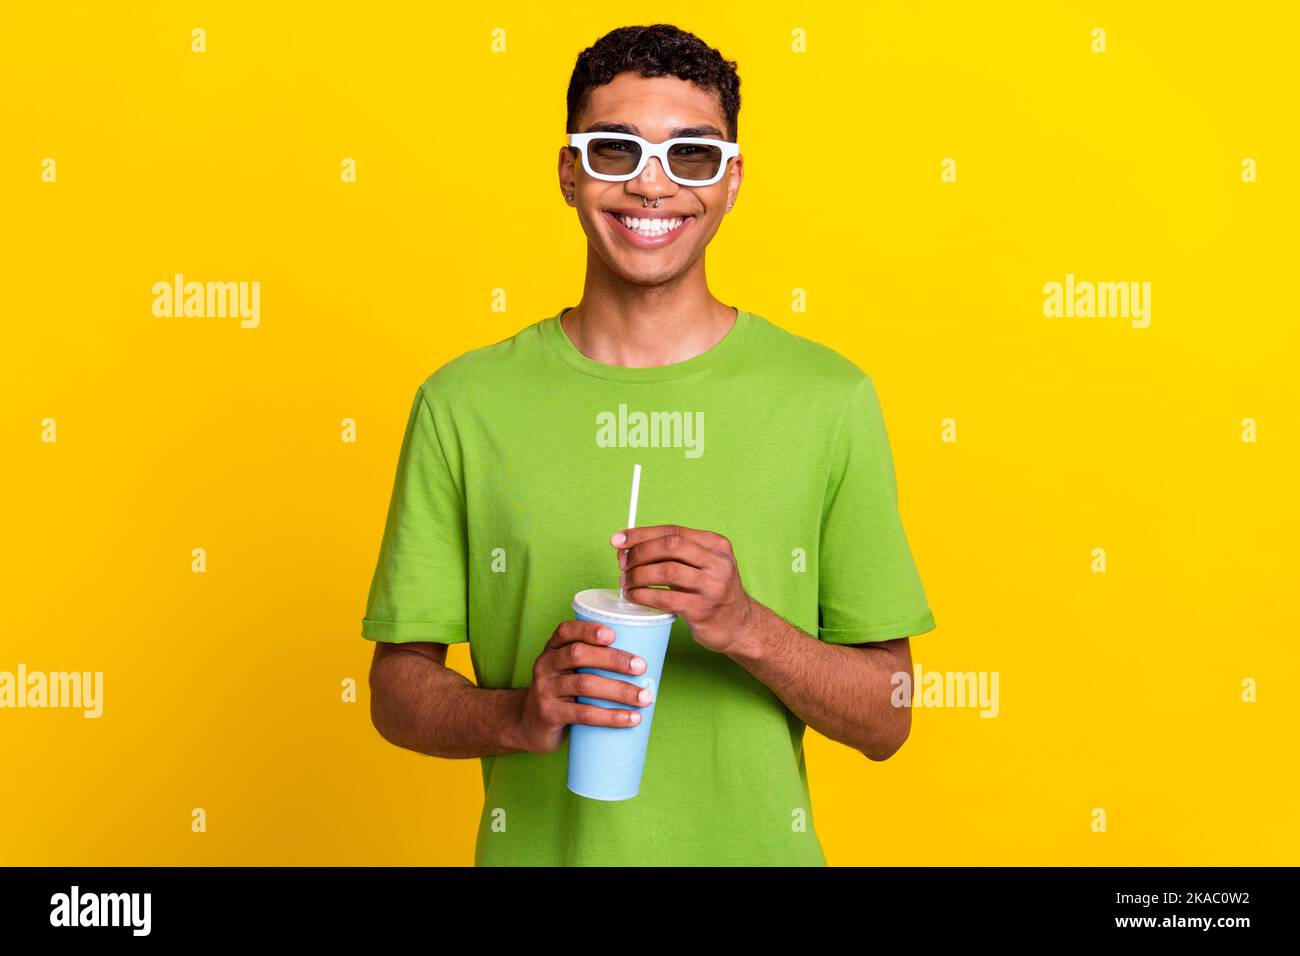 Porttrait photo of young positive attractive smiling man wear white glasses good mood hold soda cola drink emotion after cinema isolated on yellow Stock Photo